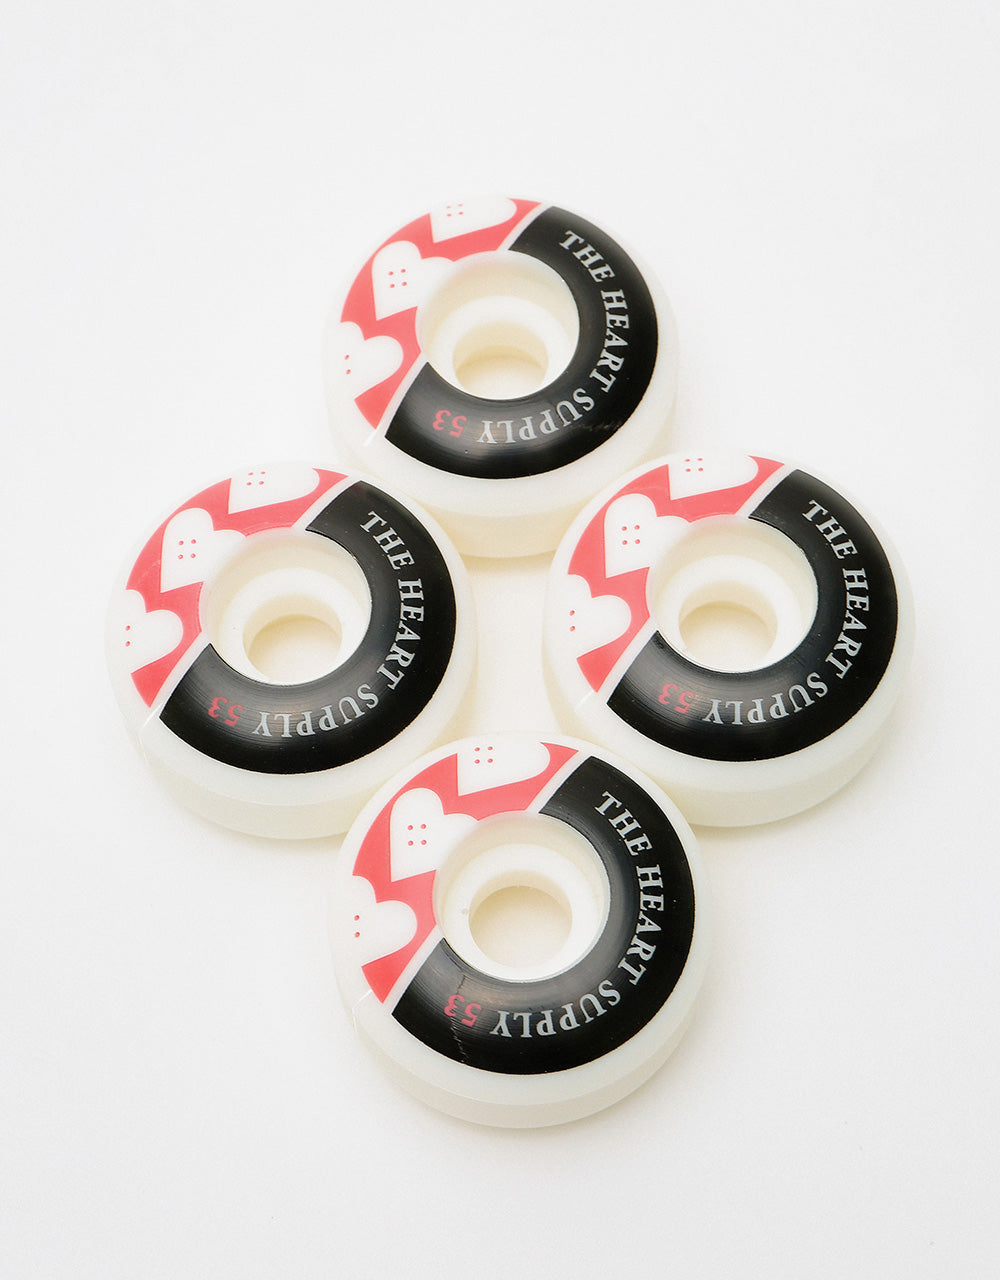 The Heart Supply Squad 99a Skateboard Wheel - 53mm